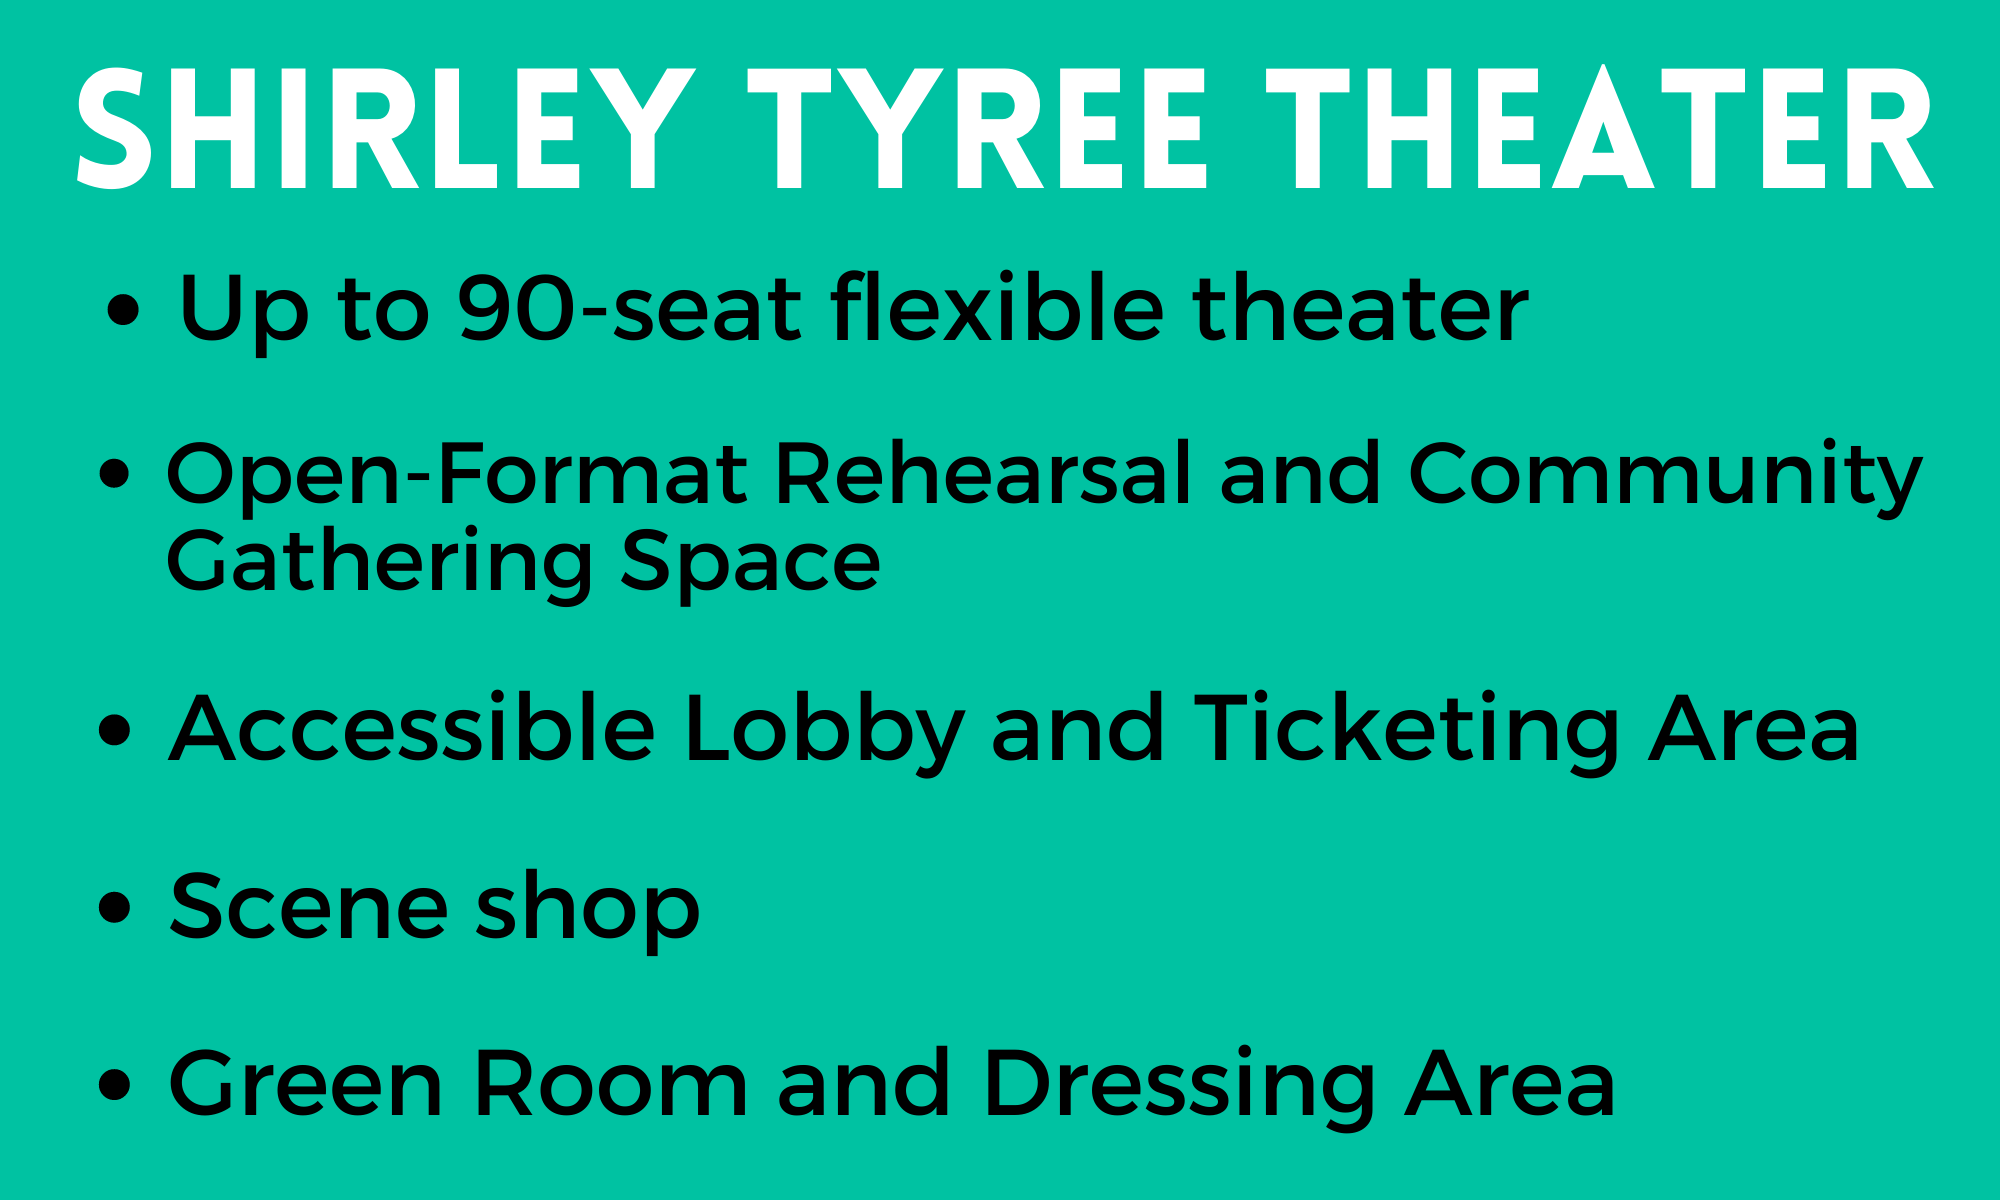 Shirley Tyree Theater Ammenities 90 seat theater gathering area scene shop green room and accessible lobby